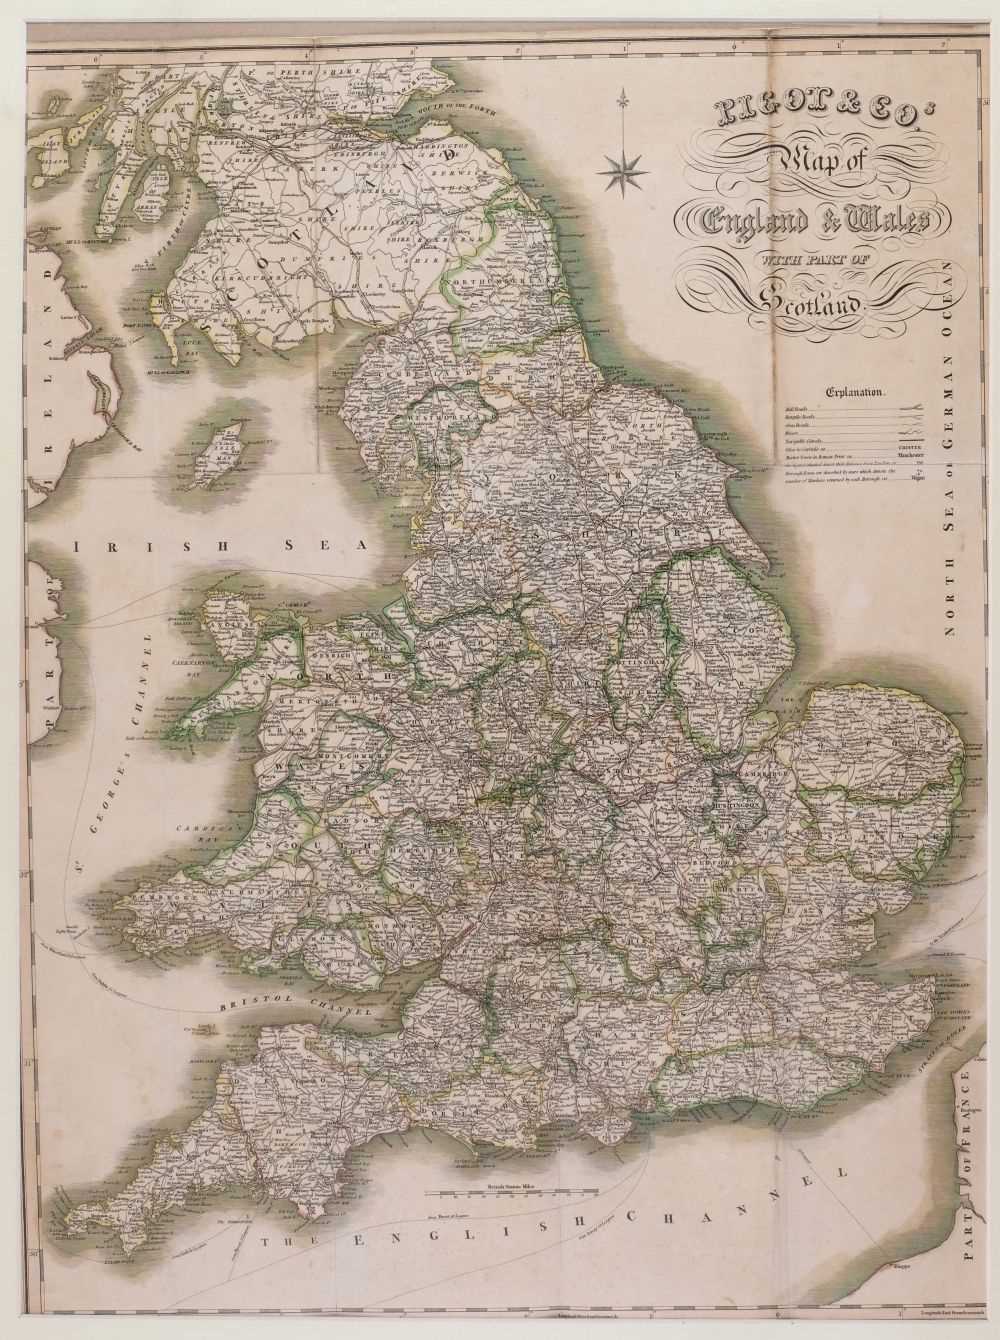 Lot 46 - Pigot (James). Pigot & Co.'s Map of England & Wales with part of Scotland, circa 1839